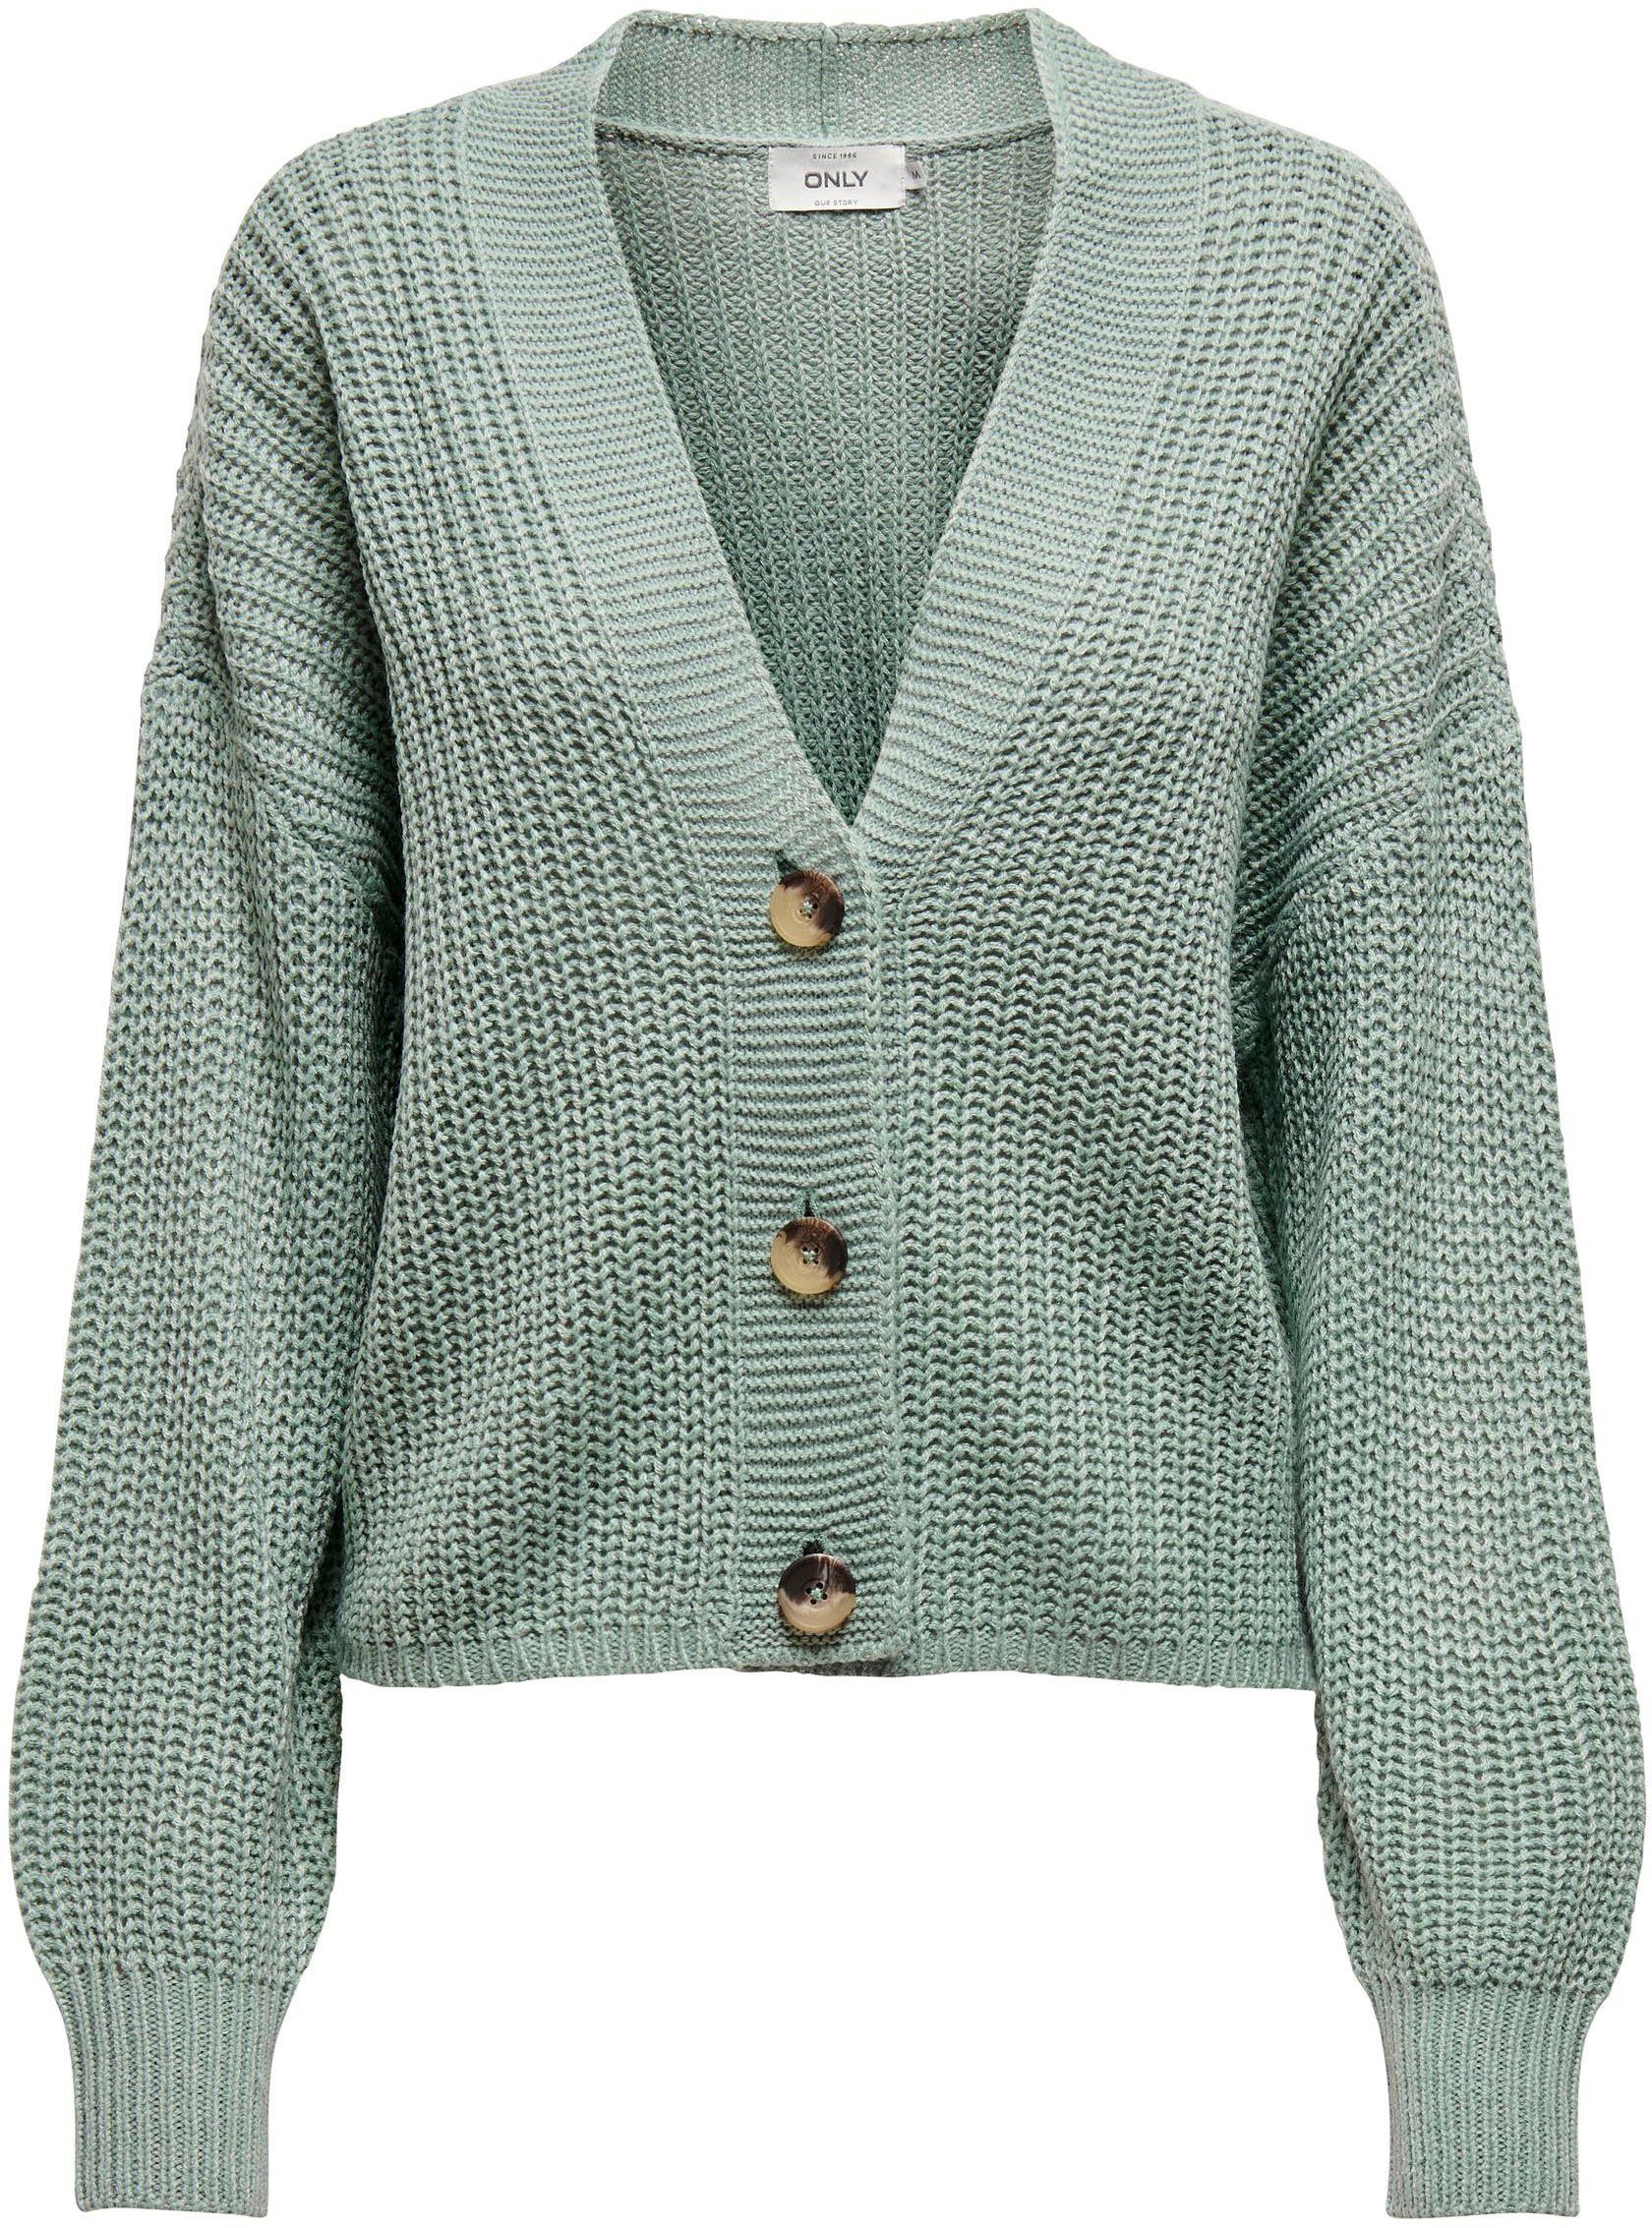 ONLY Strickjacke ONLCAROL CARDIGAN NOOS L/S chinois green NICE KNT